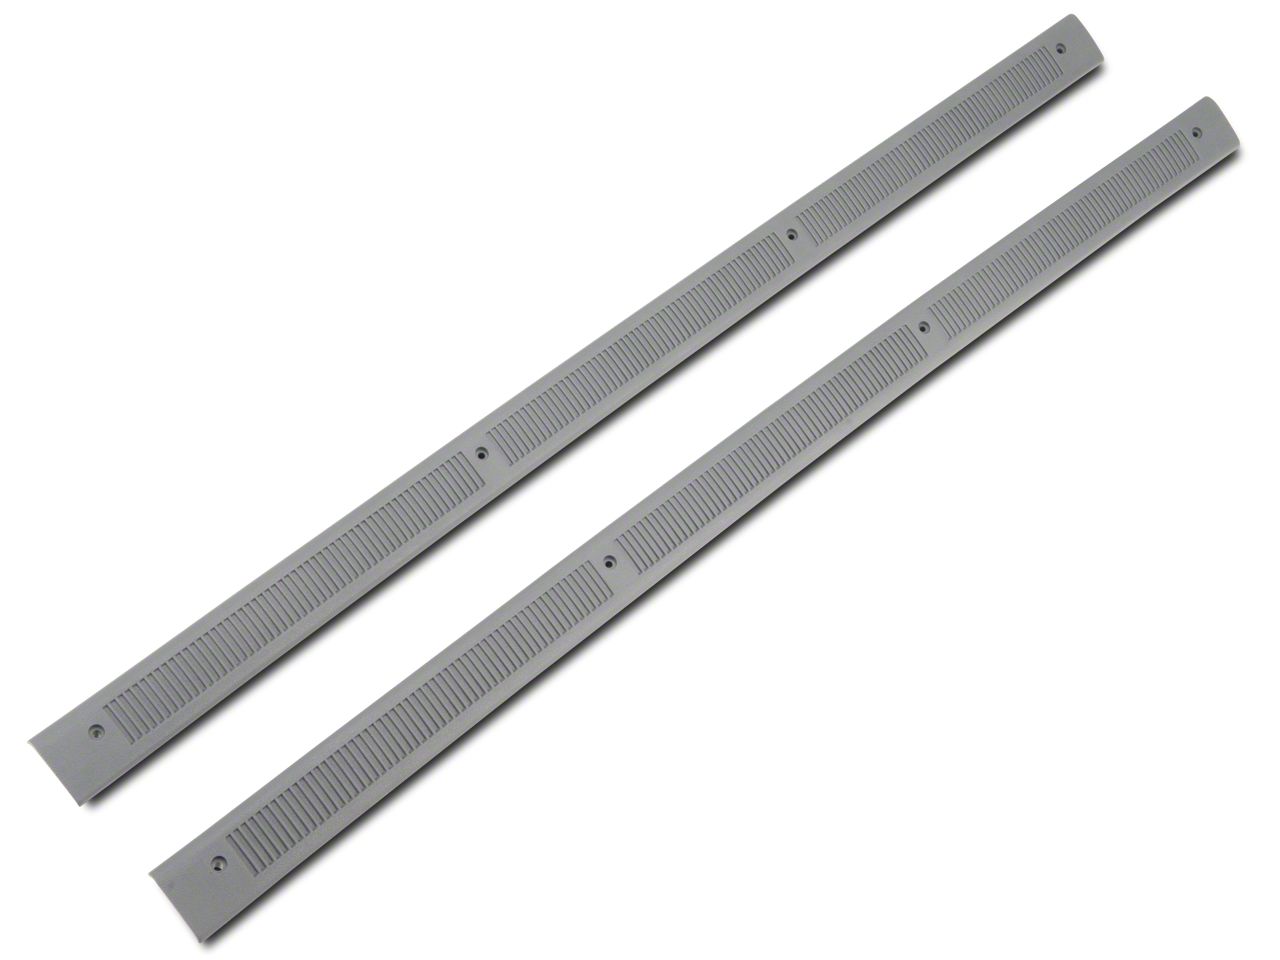 Charger Door Sill Plates 2006-2010